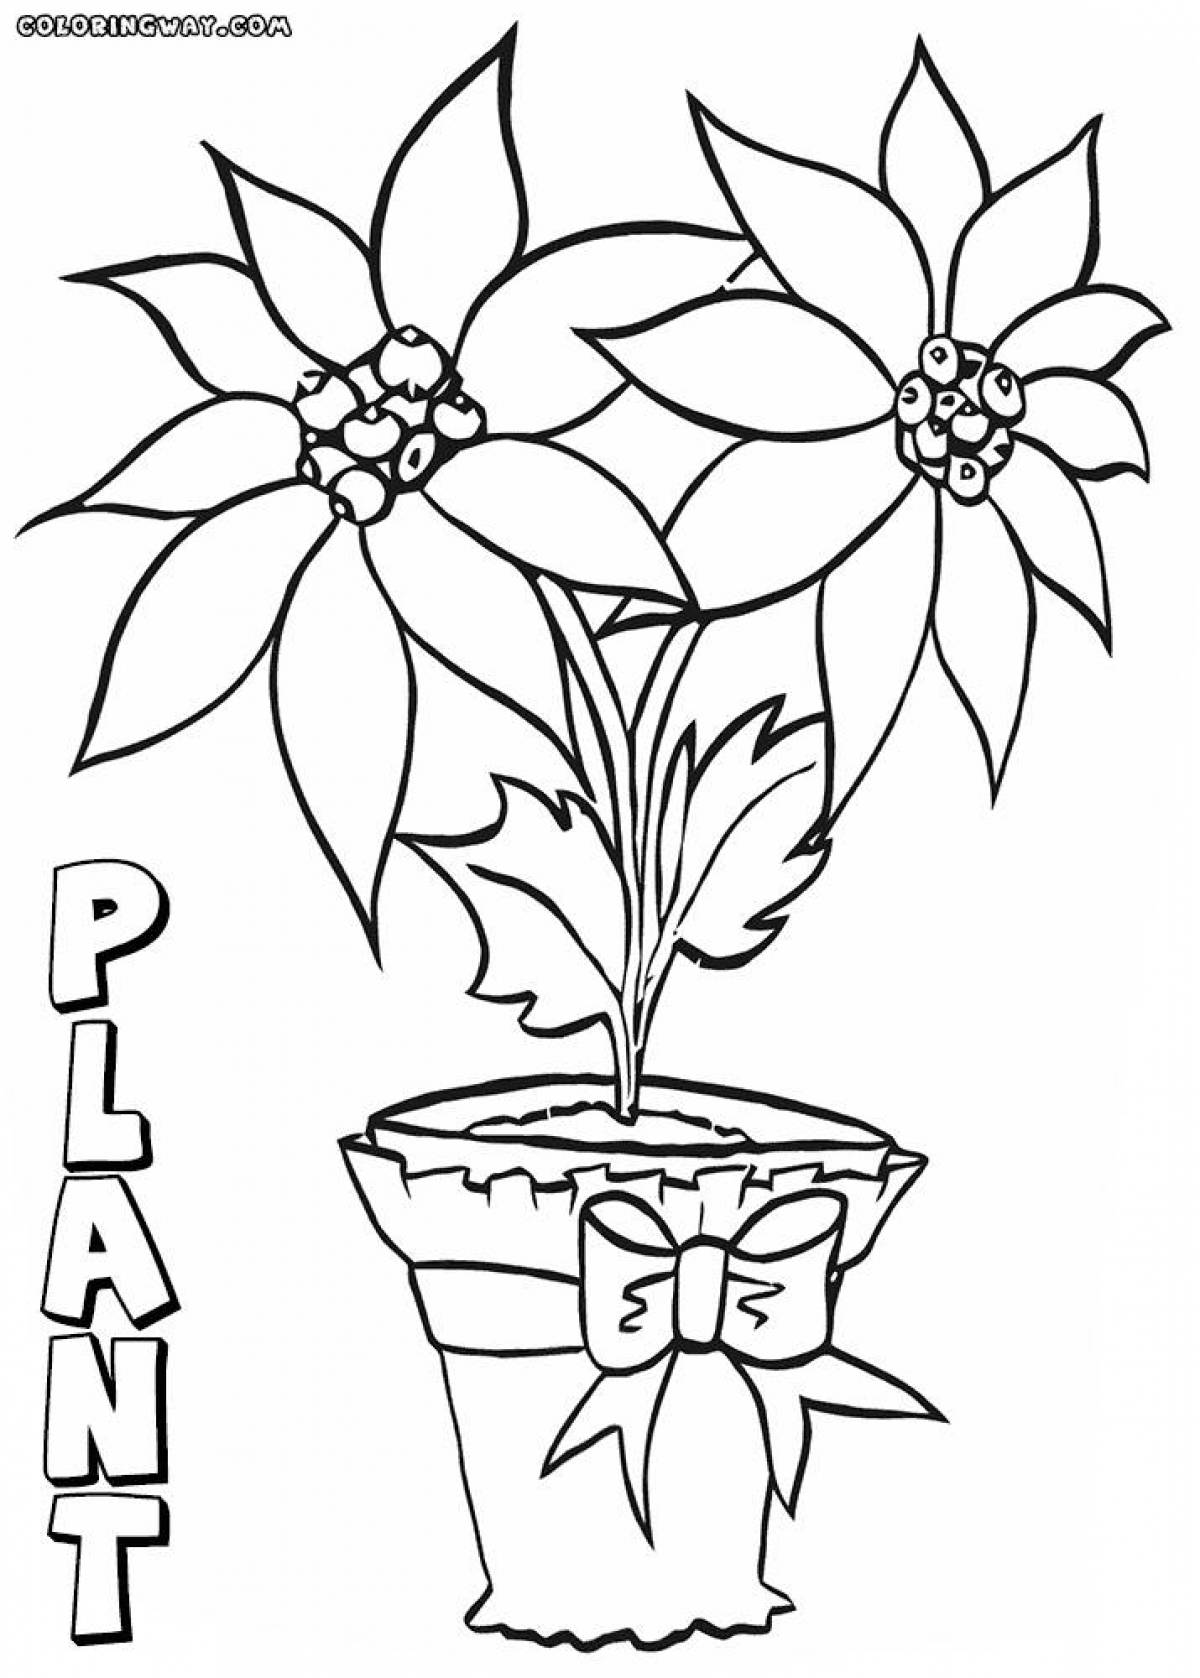 Coloring pages of houseplants